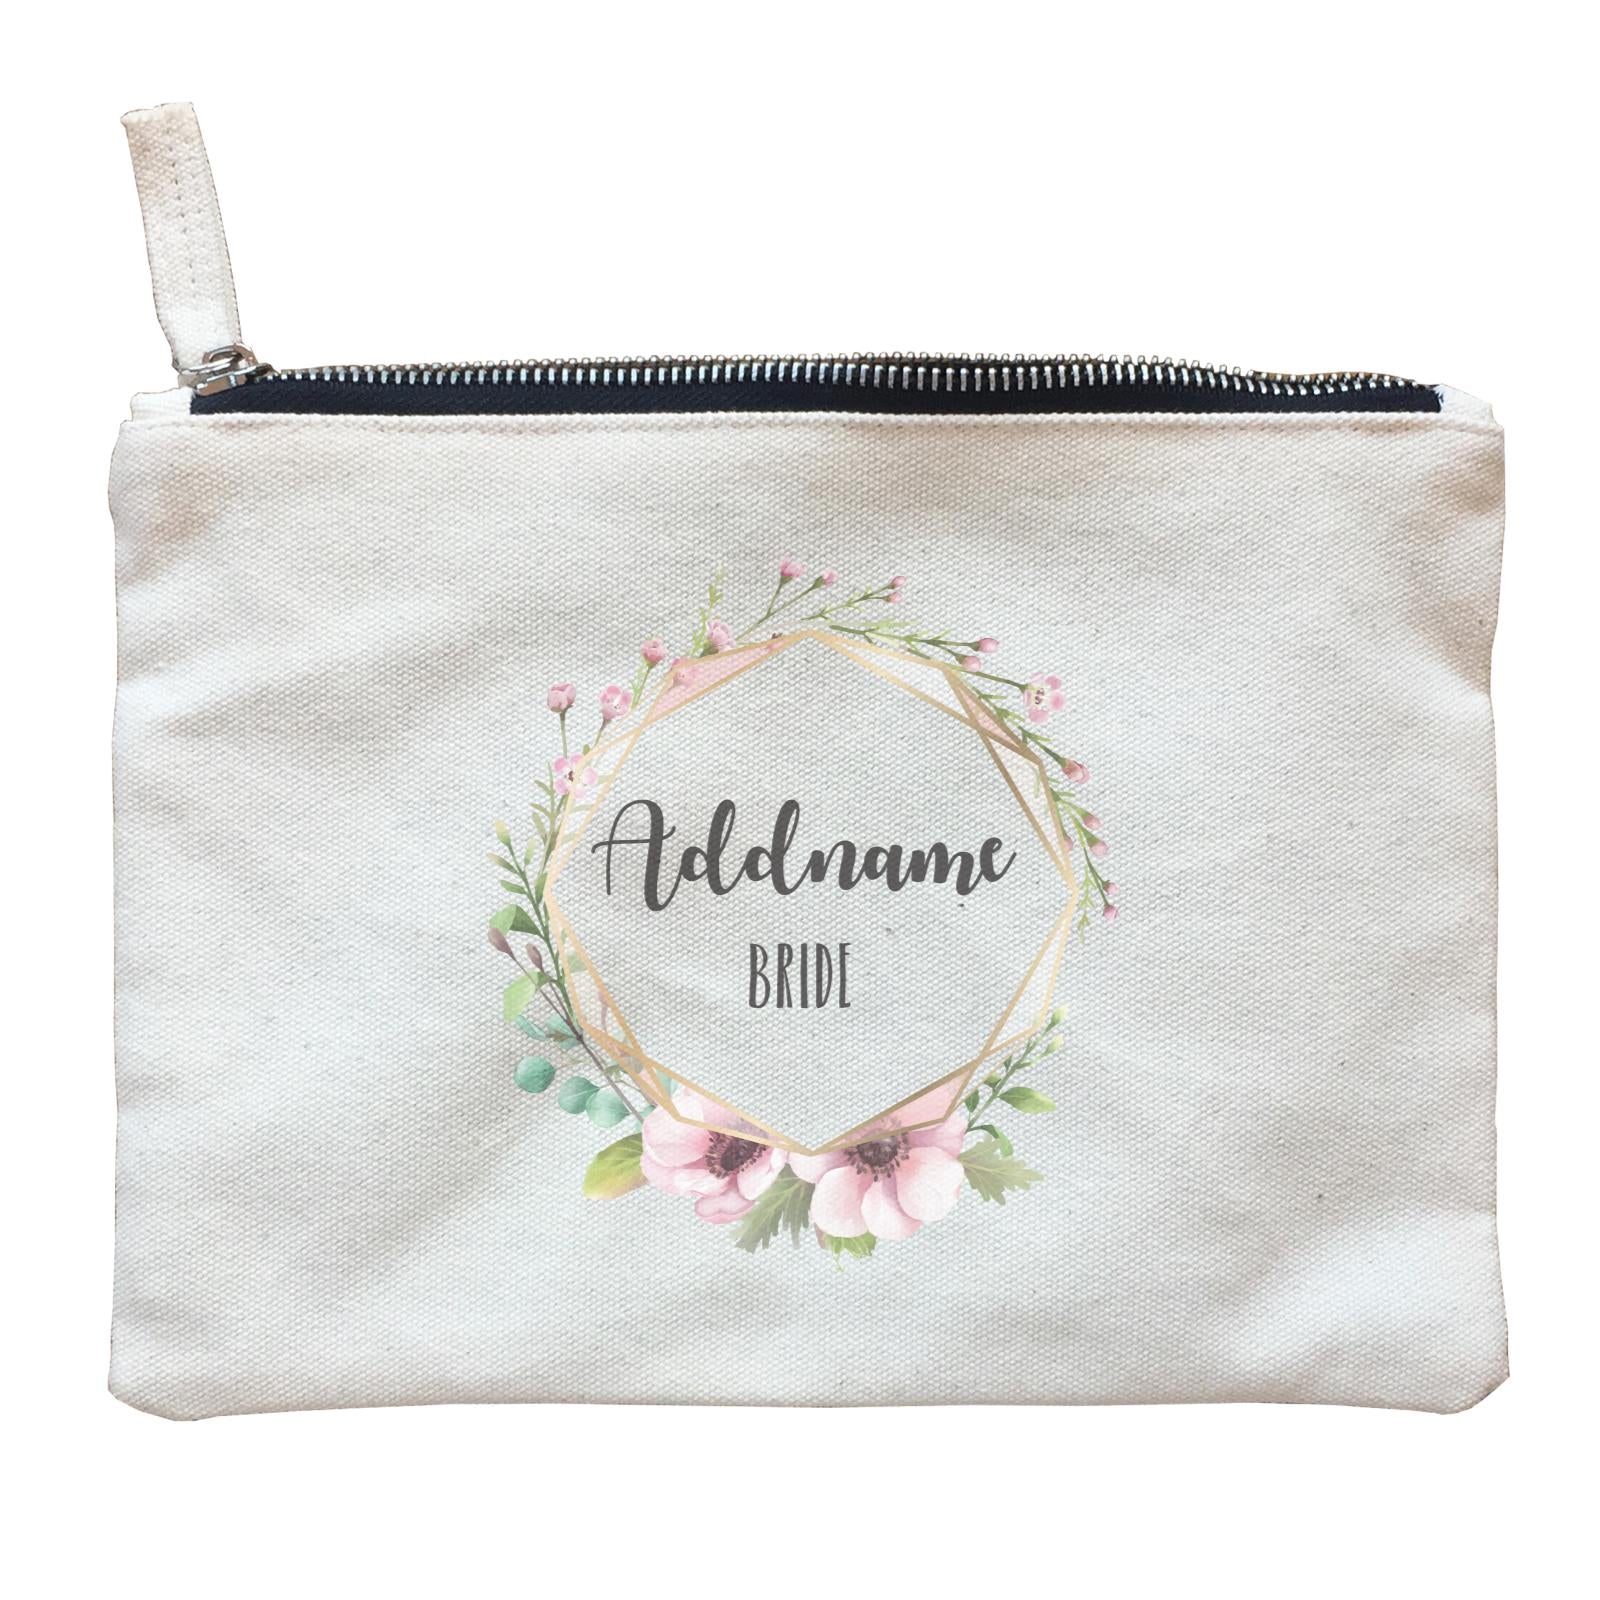 Bridesmaid Floral Modern Pink with Geometric Frame Bride Addname Zipper Pouch